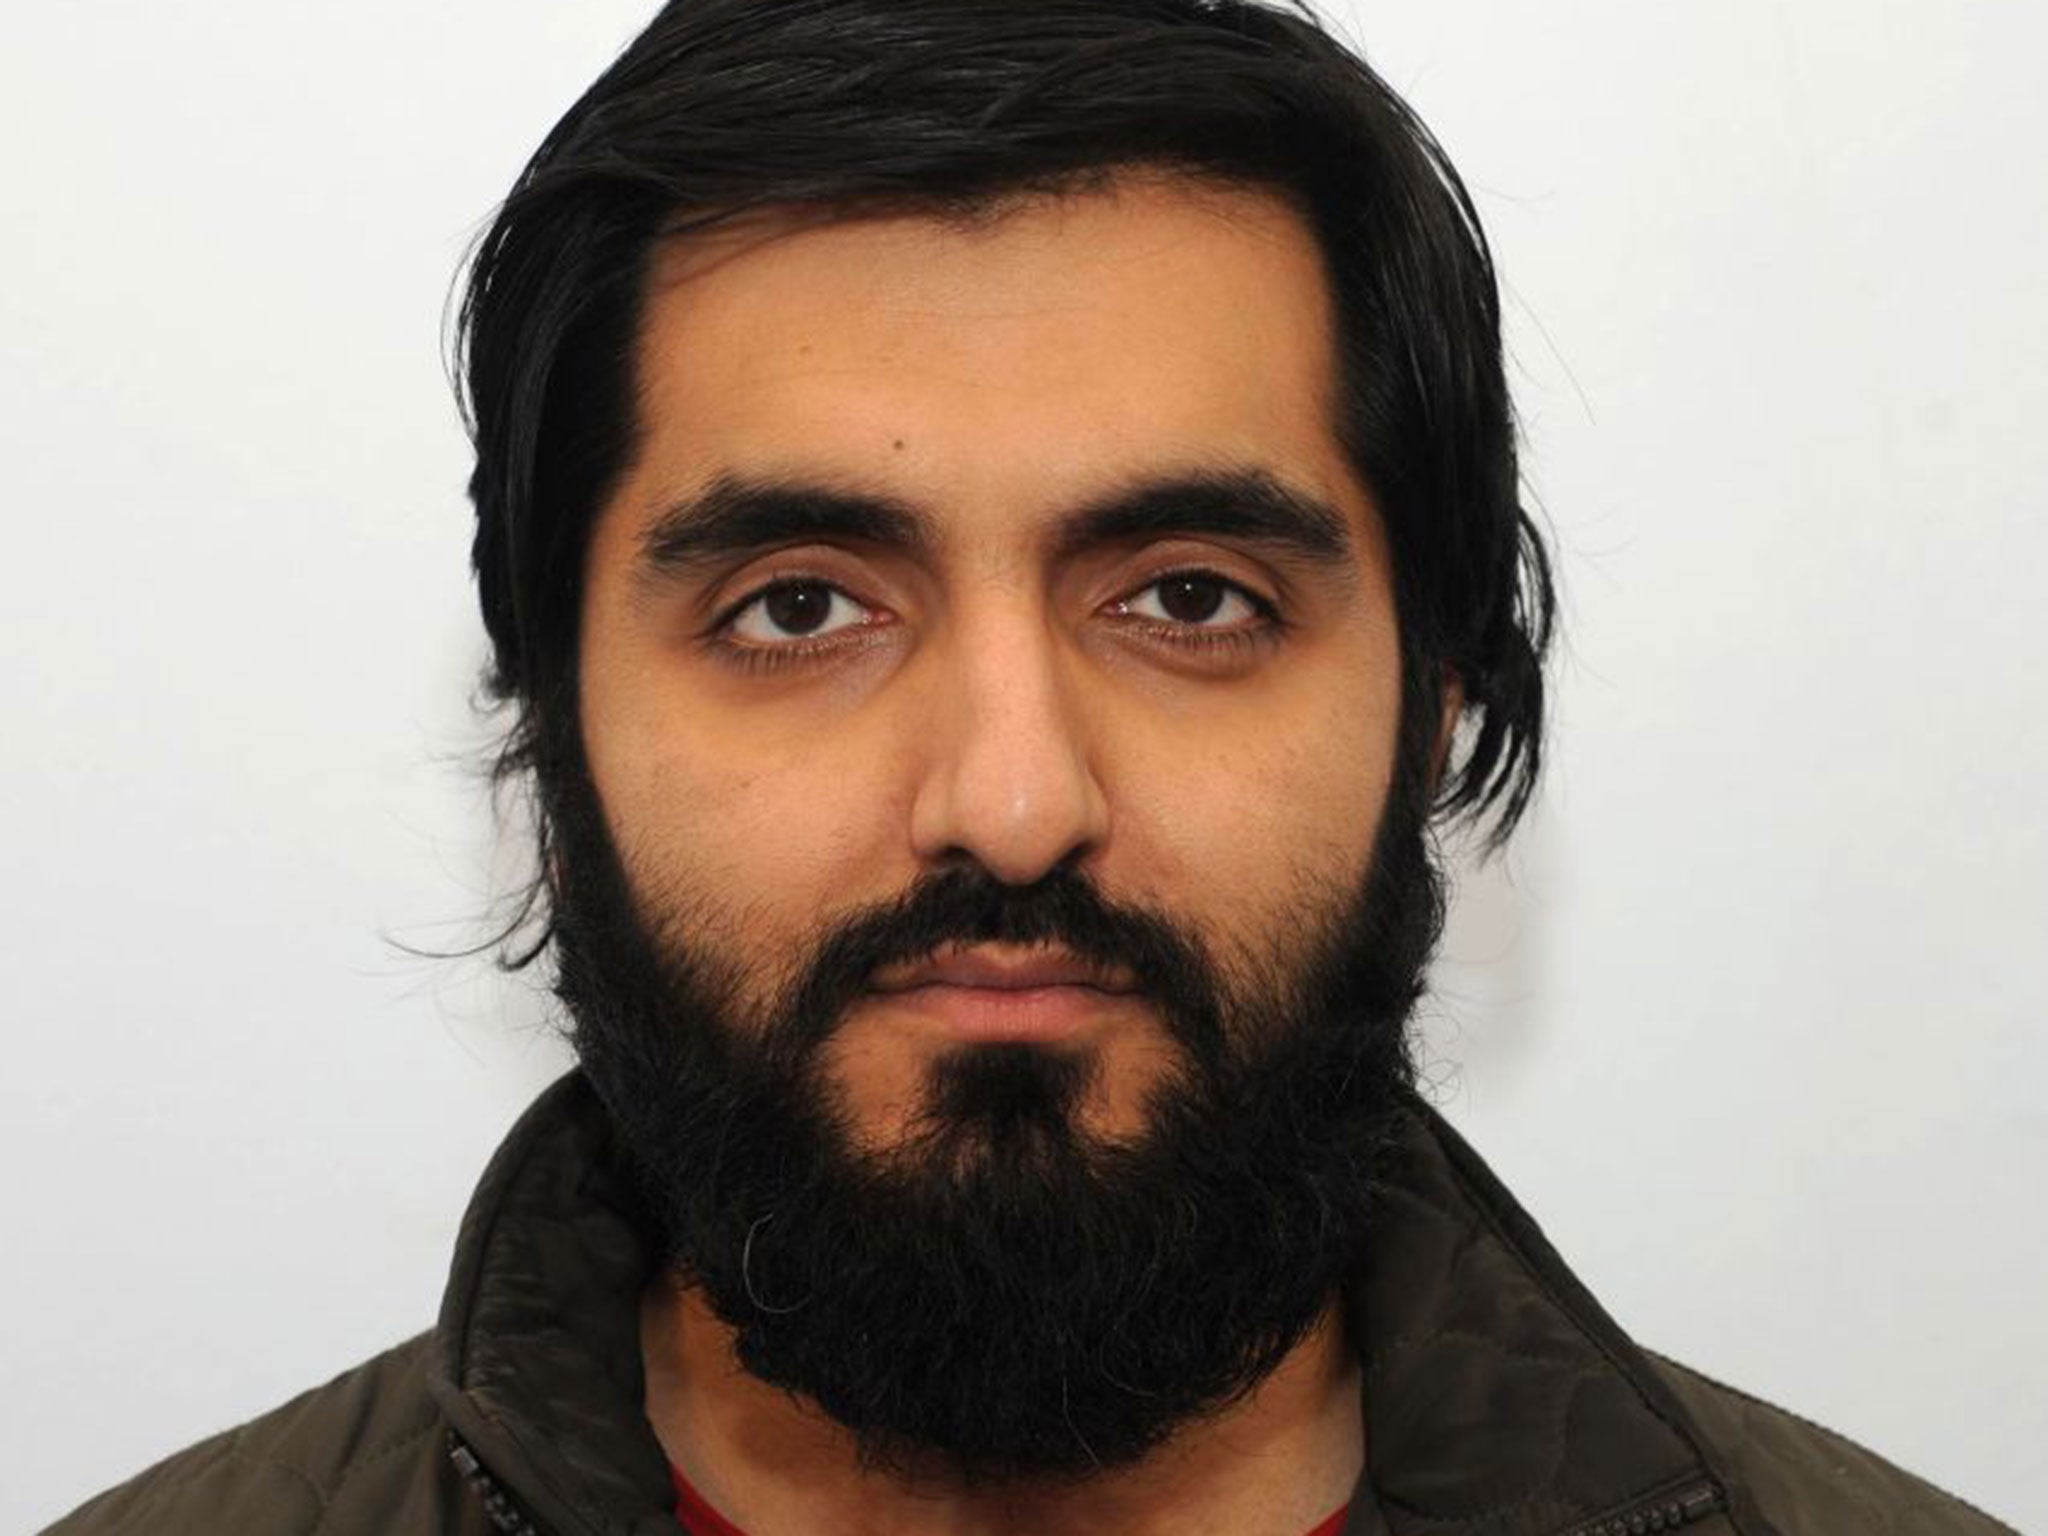 Jamshed Javeed, 30, a chemistry teacher, was planning to go to Syria to fight Assad